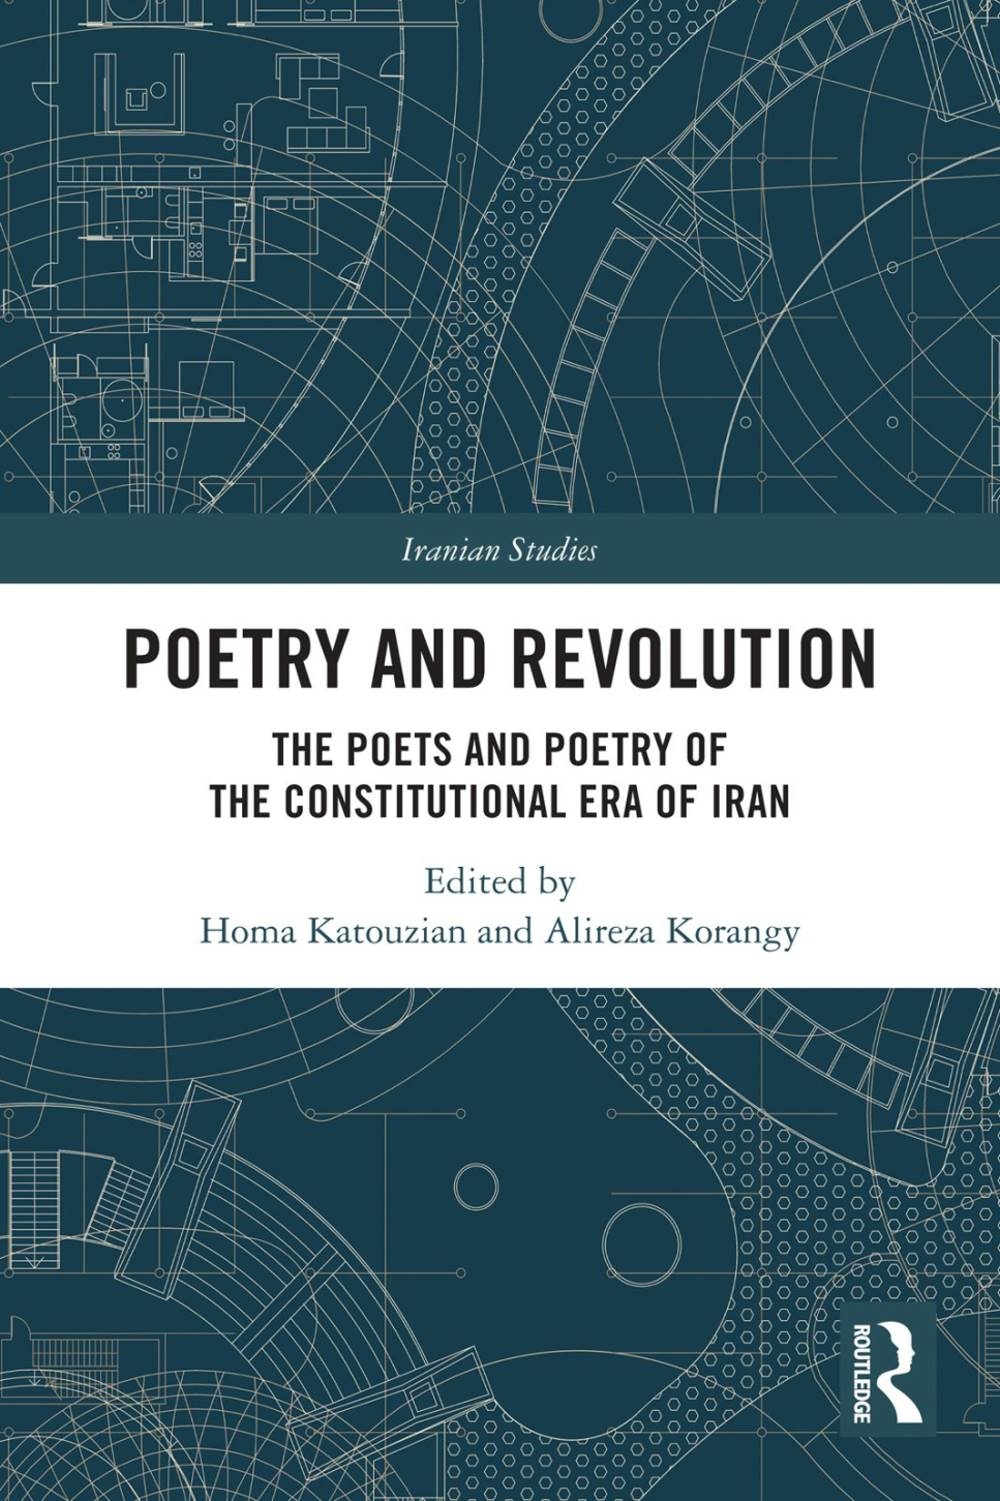 Poetry and Revolution: The Poets and Poetry of the Constitutional Era of Iran